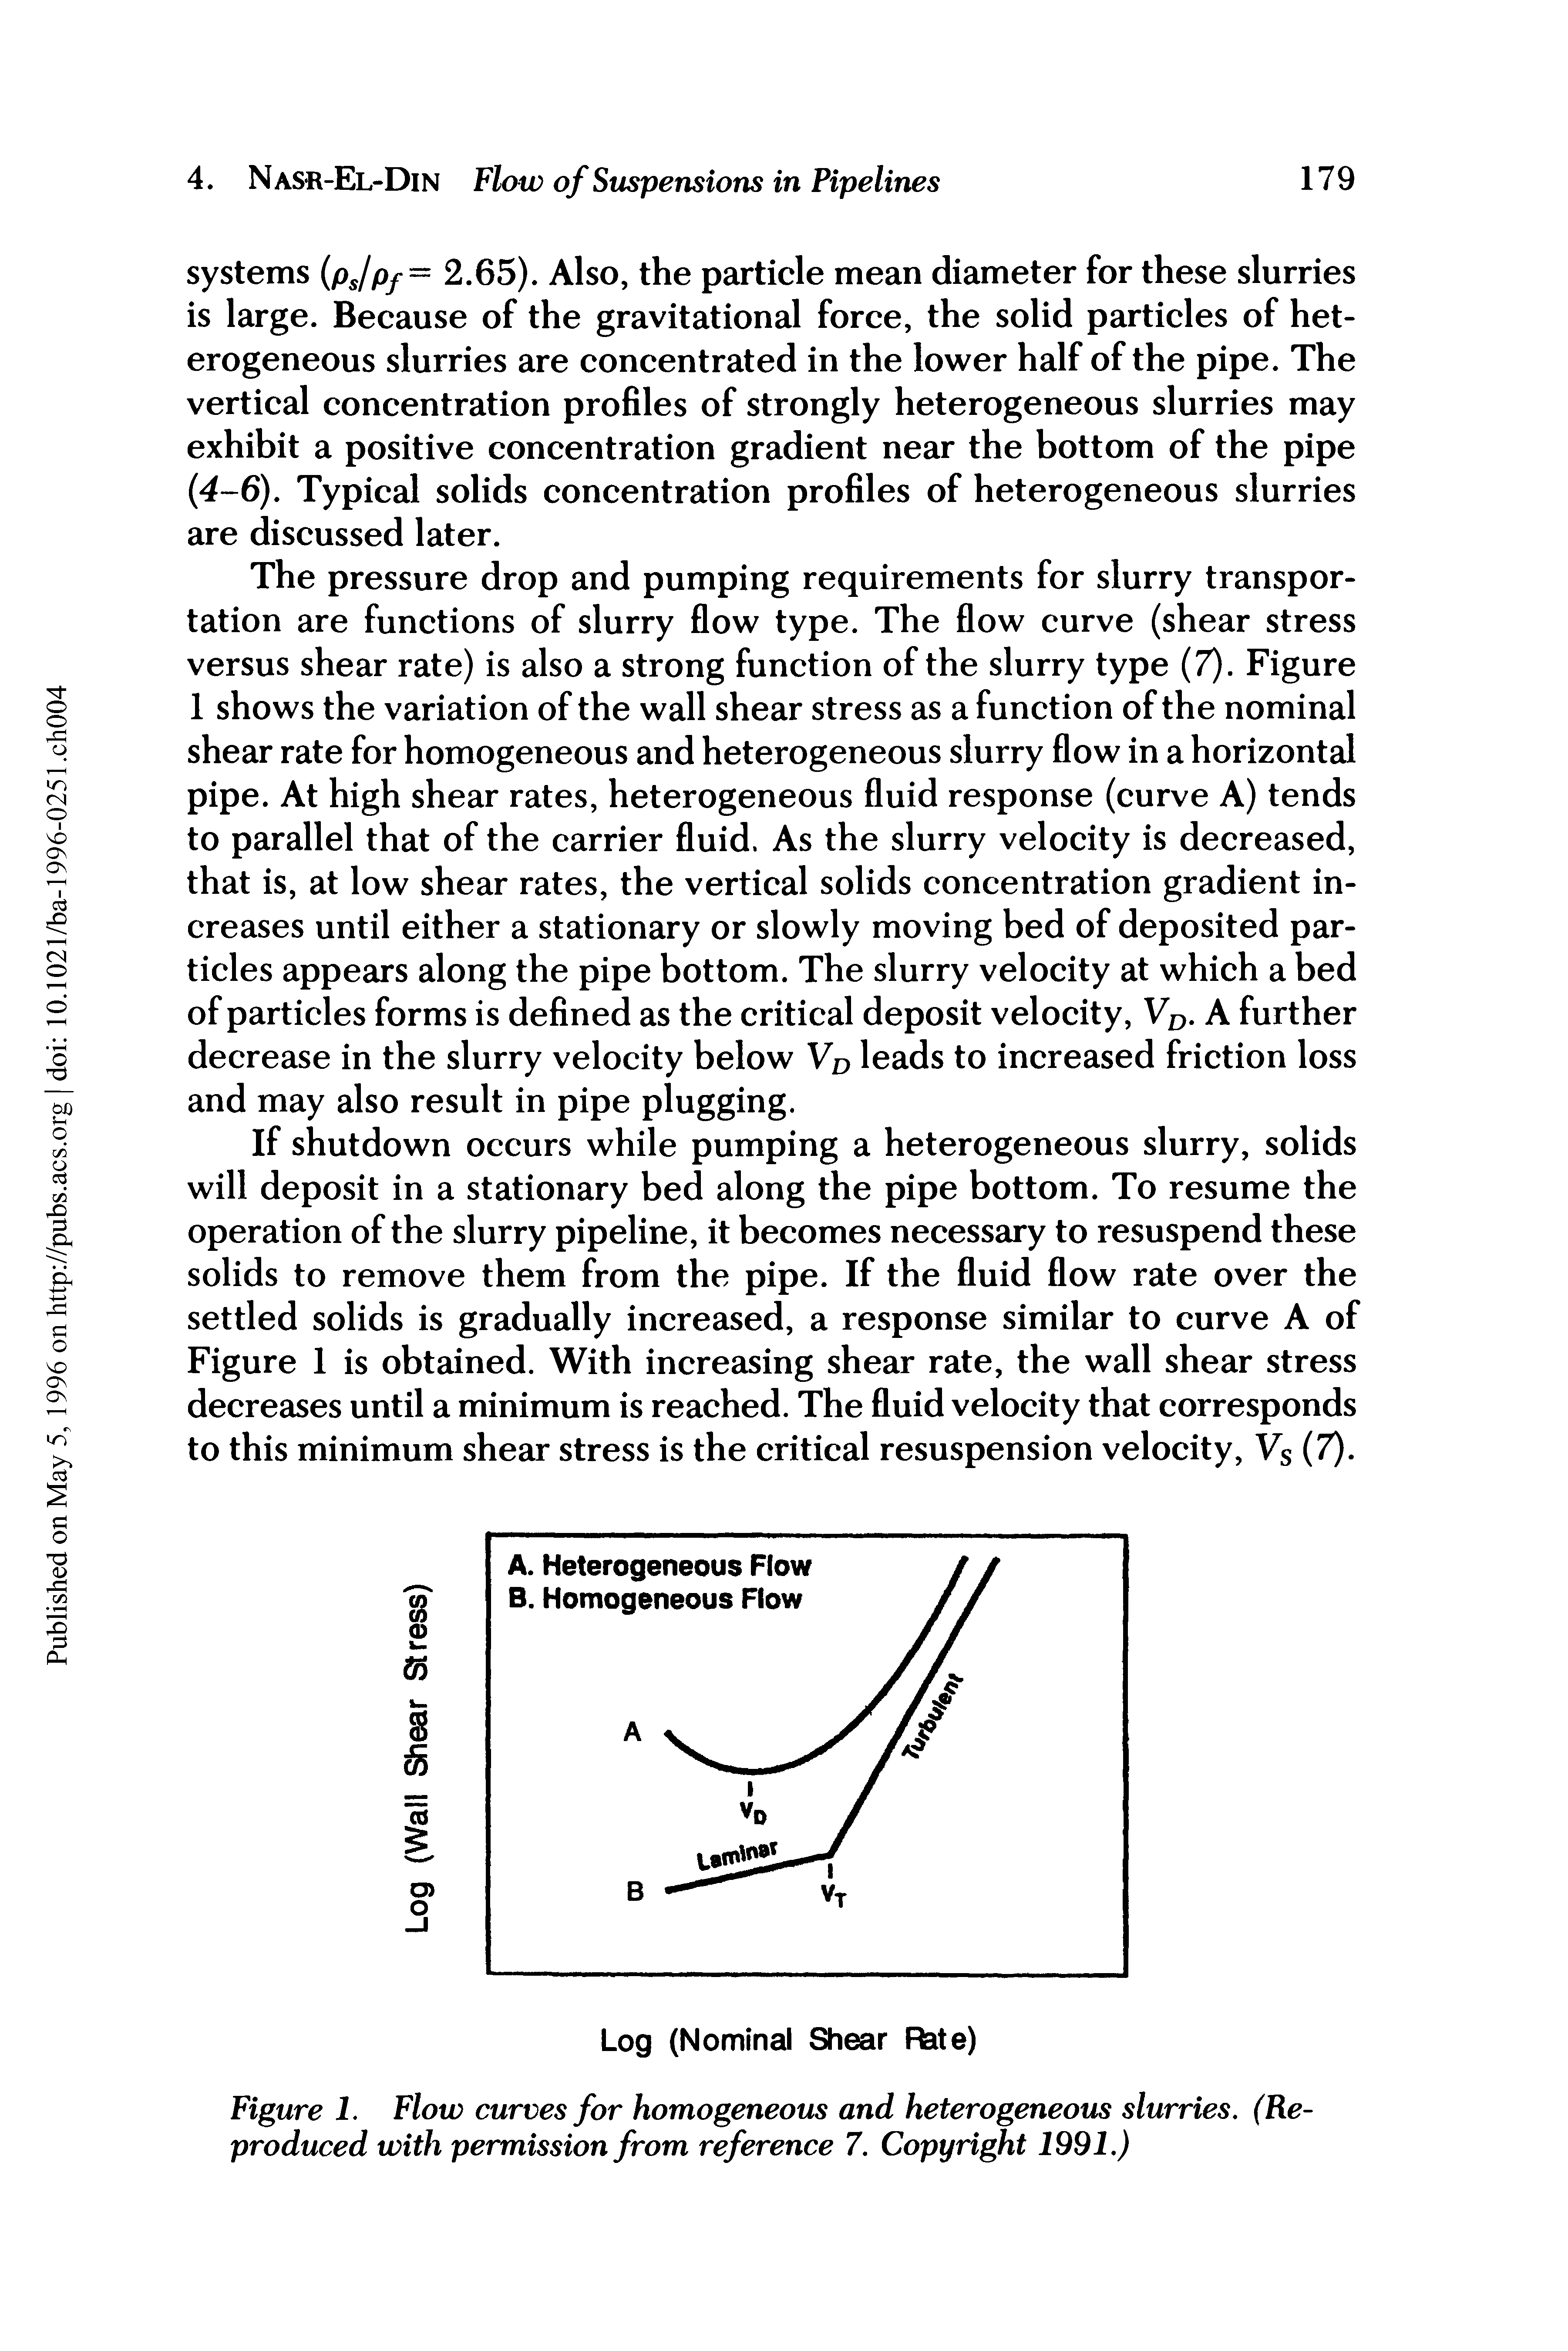 Figure 1. Flow curves for homogeneous and heterogeneous slurries. (Reproduced with permission from reference 7. Copyright 1991.)...